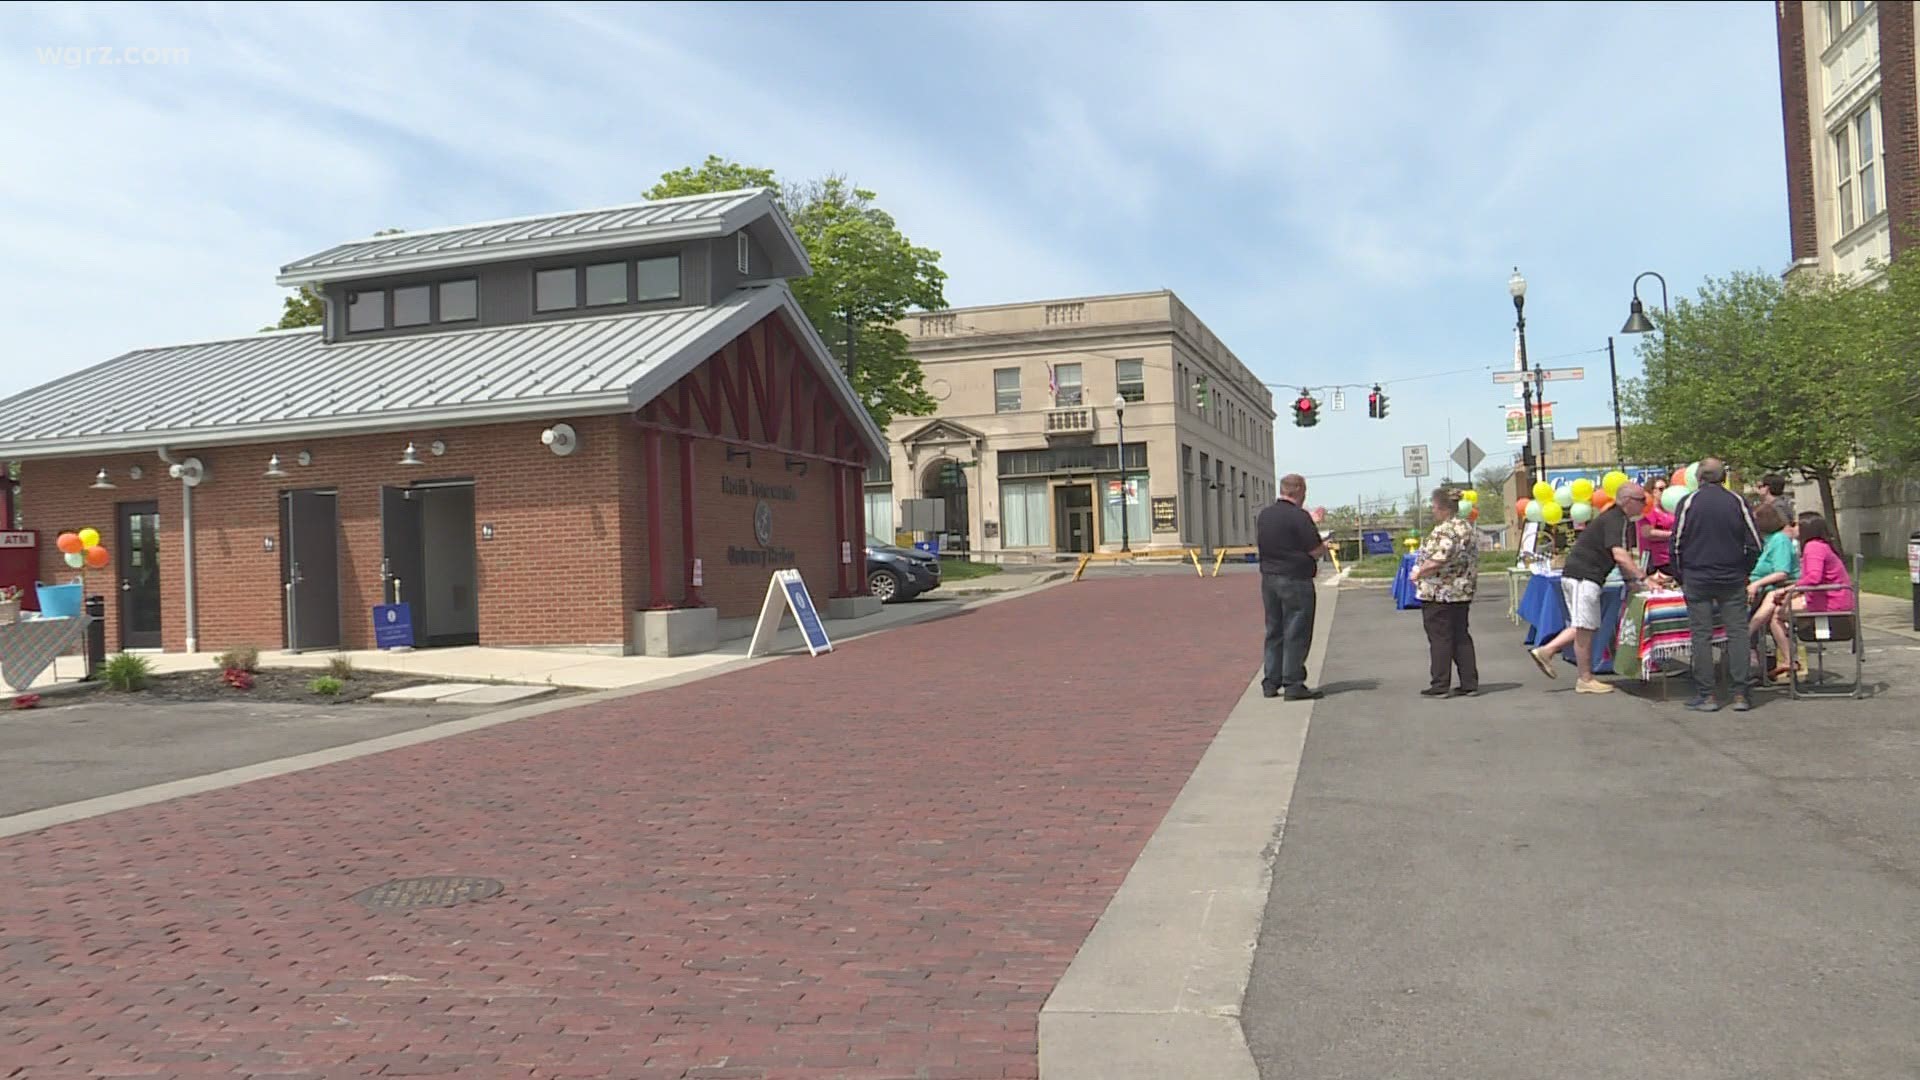 The goal is to help people take advantage of trails, parks, restaurants and other offerings. One site will run year-round on Sweeney Street in North Tonawanda.